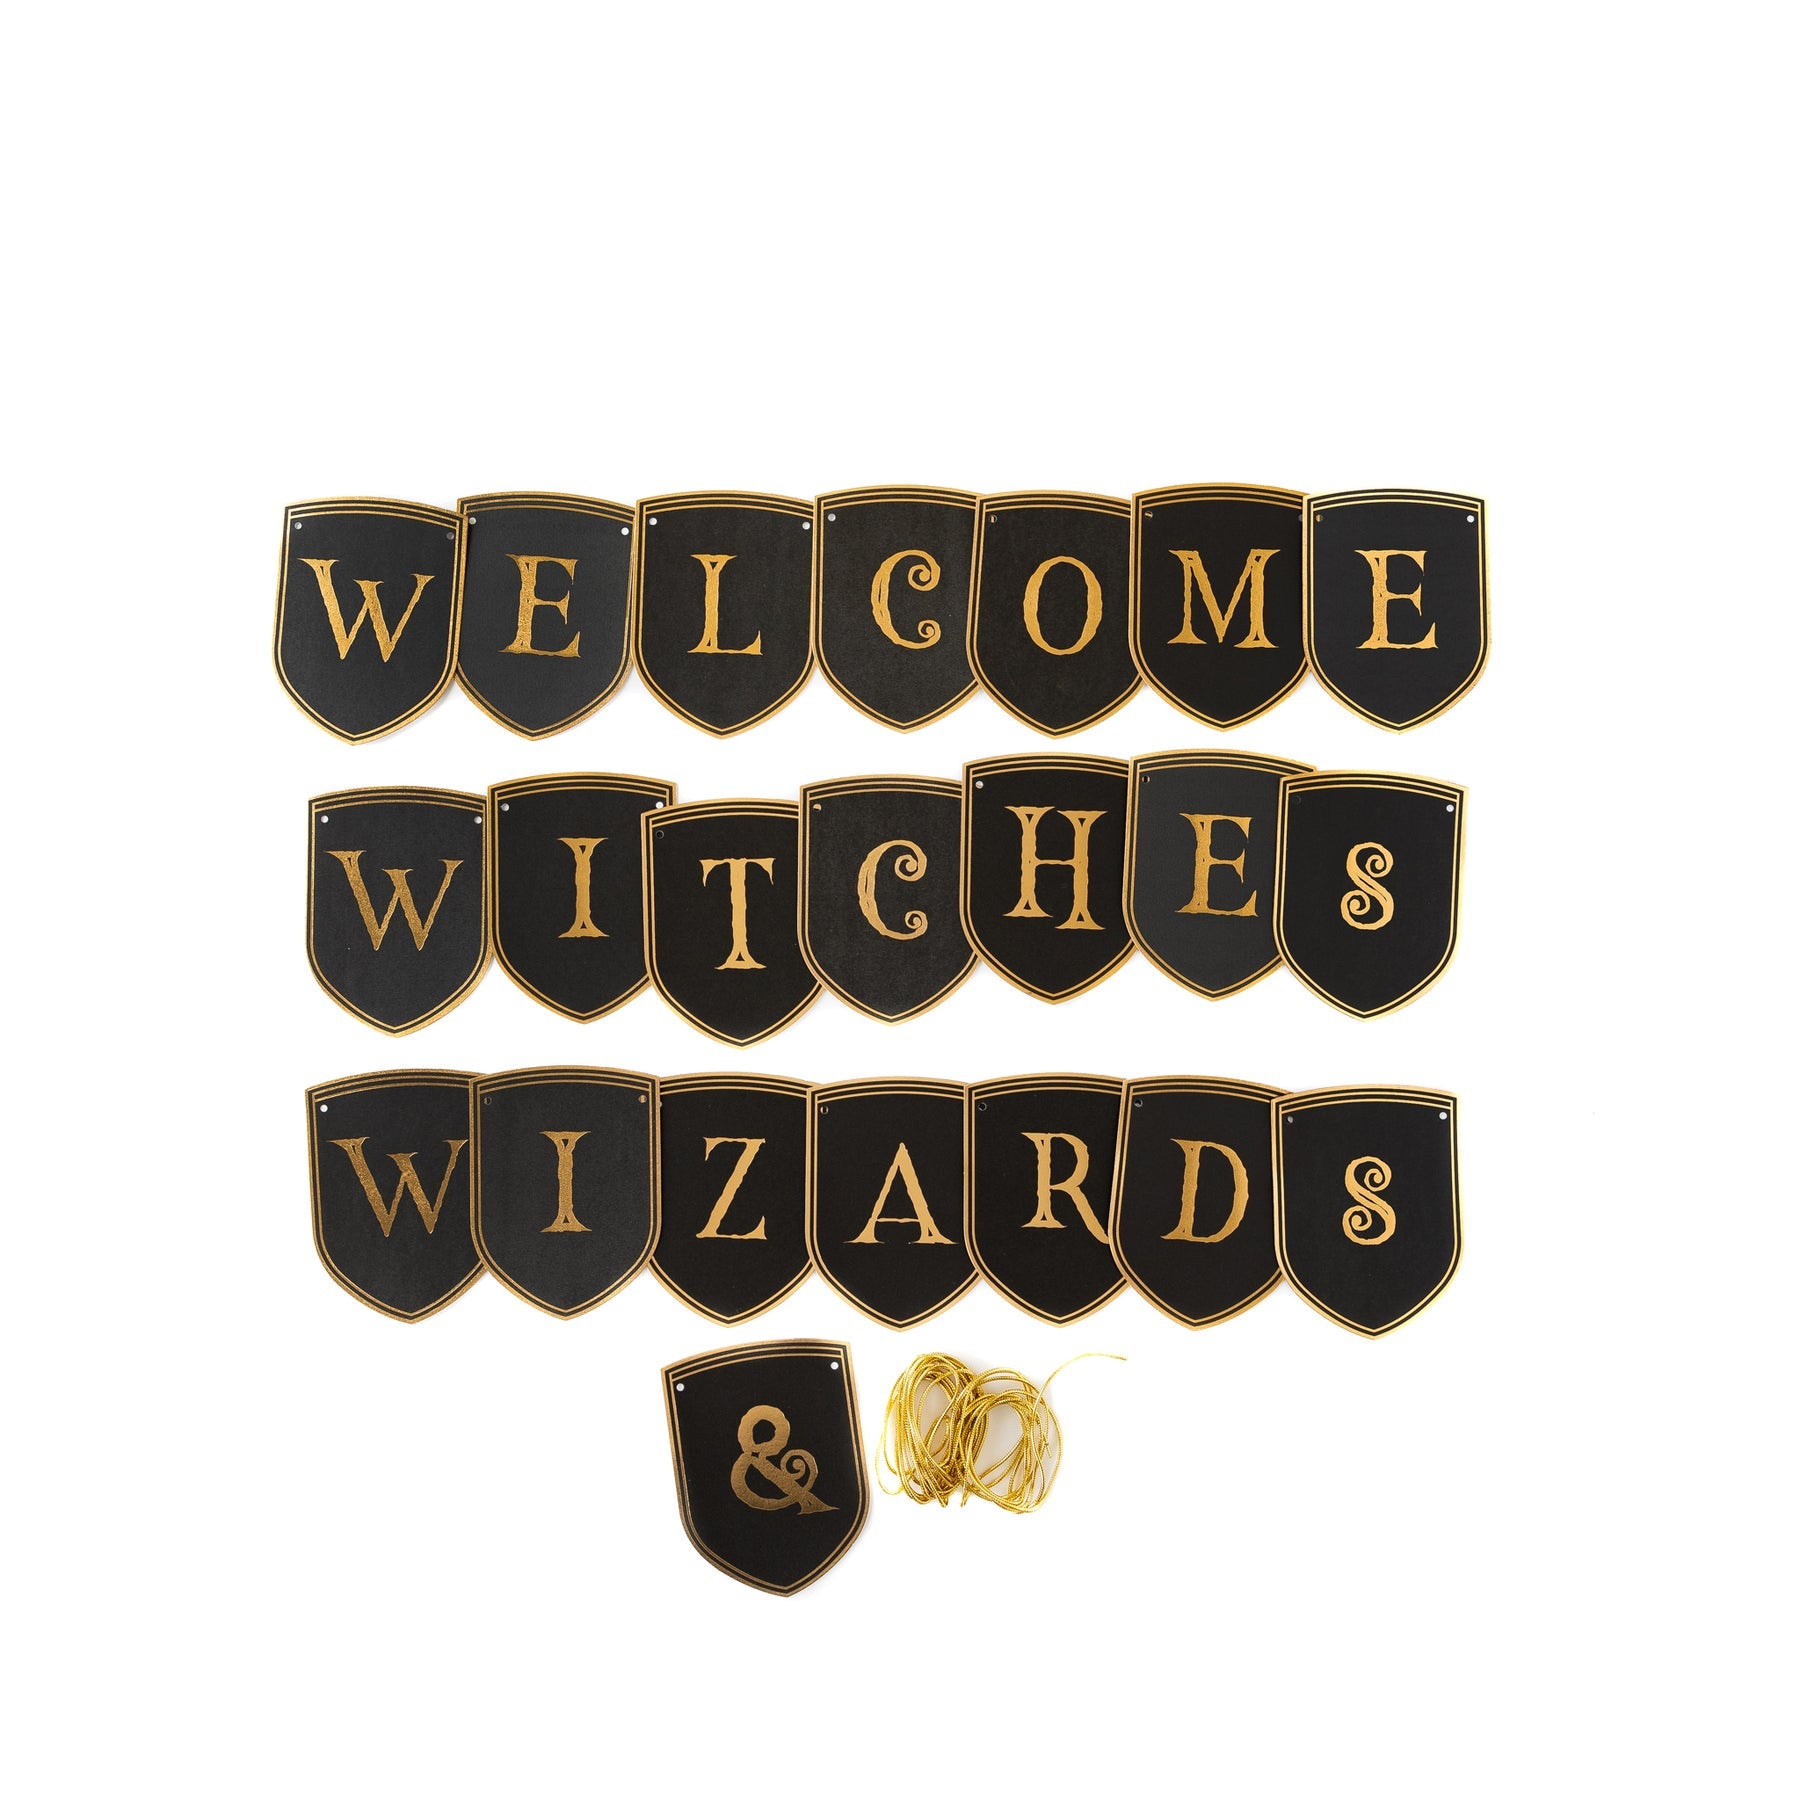 Spellbound “Welcome Witches & Wizards” Banner - Muddy Boots Home UK